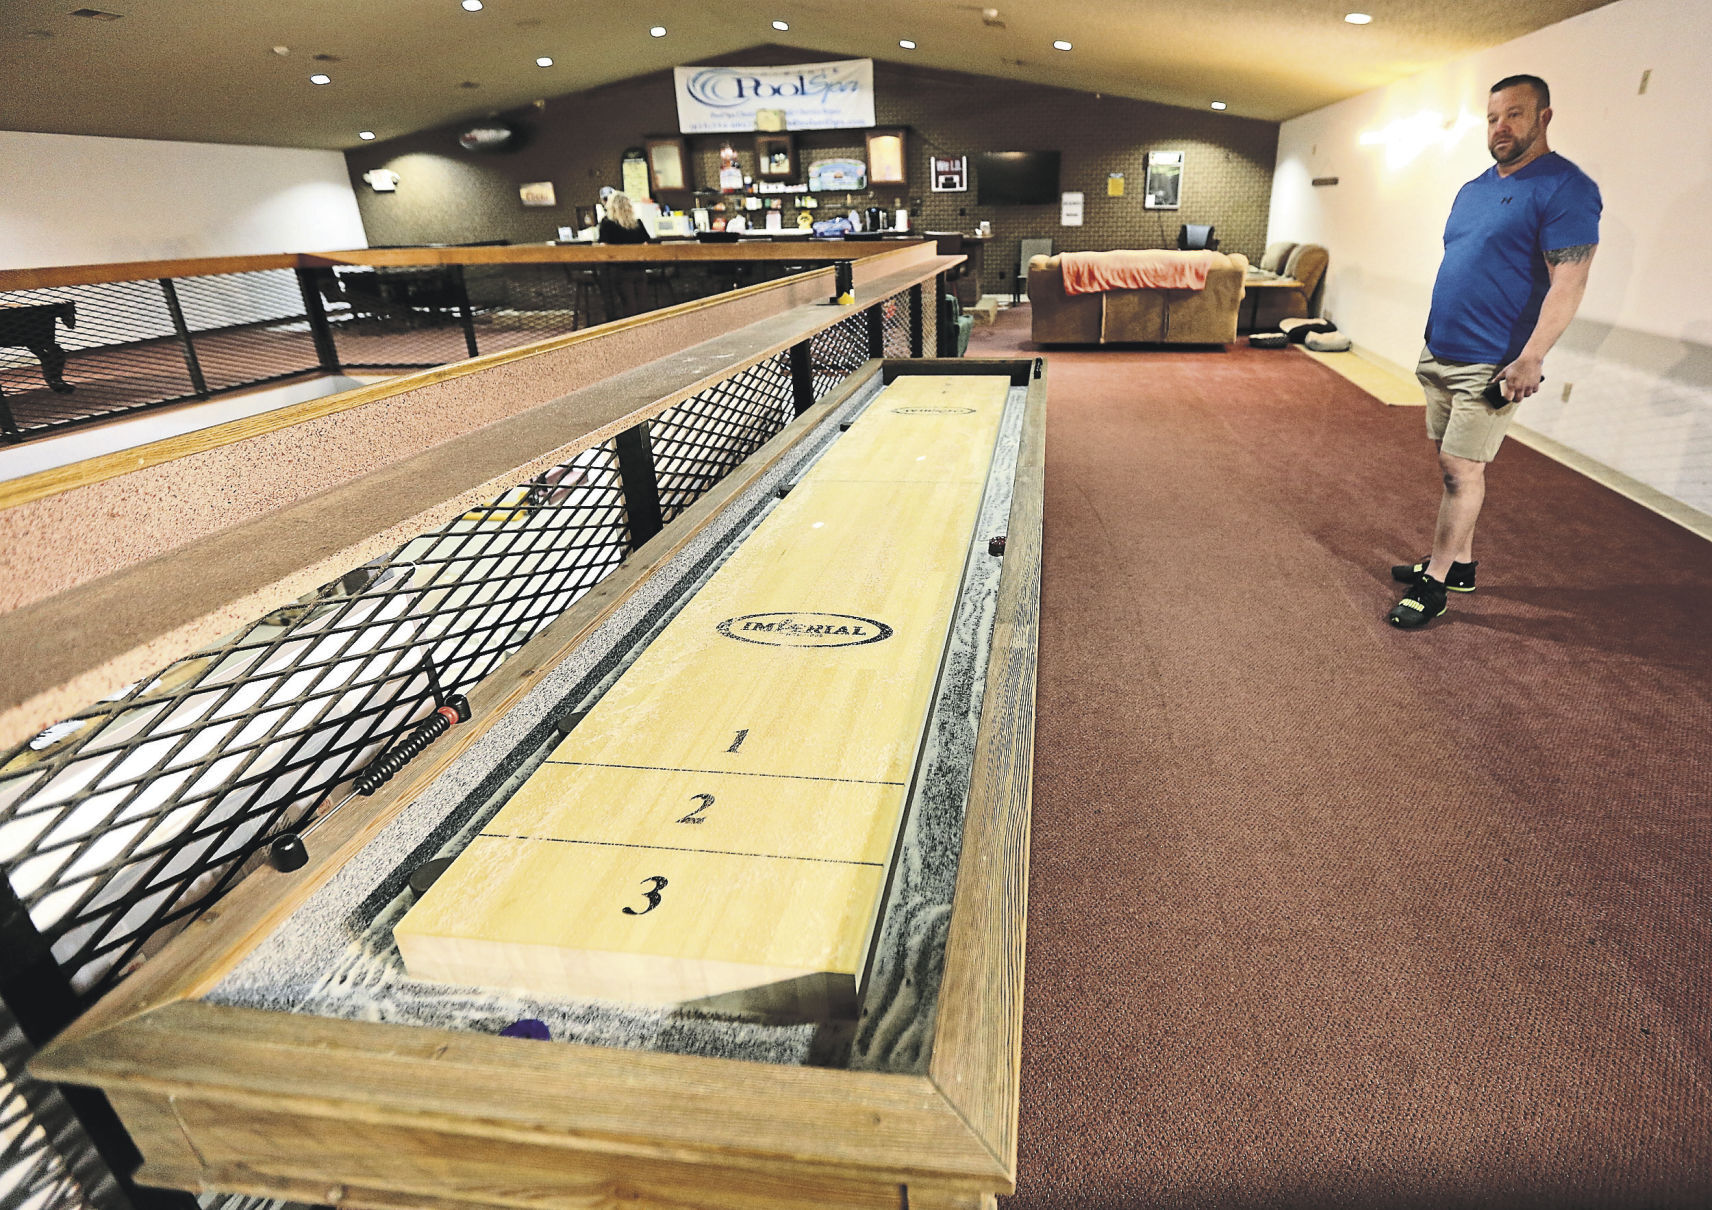 Owners of Tri-State Pool & Spa in East Dubuque, Ill., Luke Tigges looks over a shuffle board on display in their store. PHOTO CREDIT: Dave Kettering